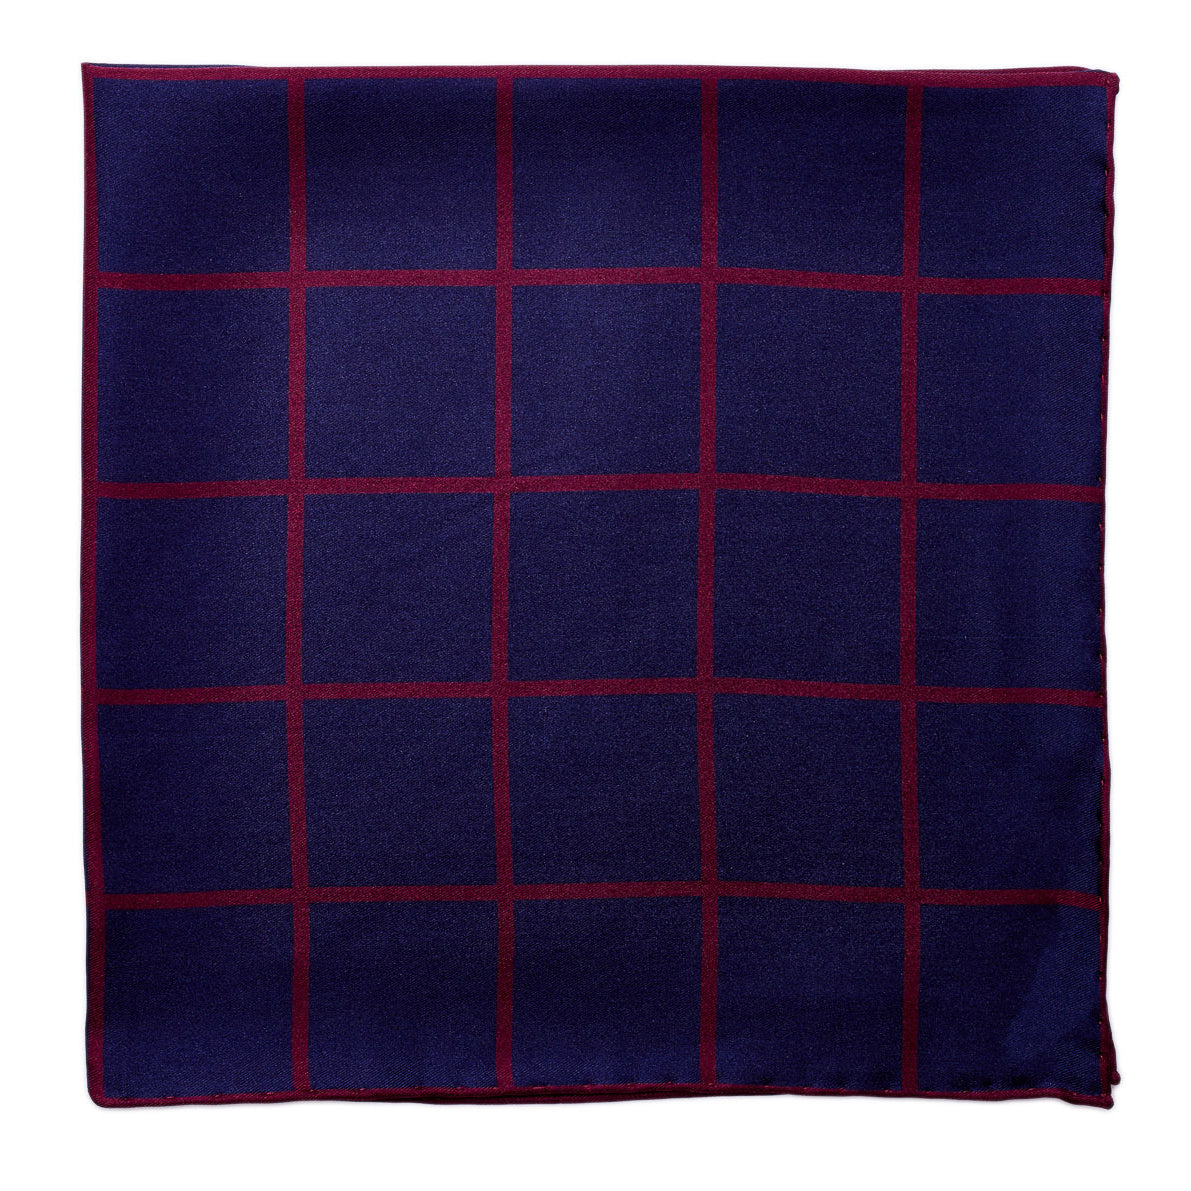 A Sovereign Grade Prince of Wales pocket square in navy and burgundy plaid with silk fabric, available at KirbyAllison.com.